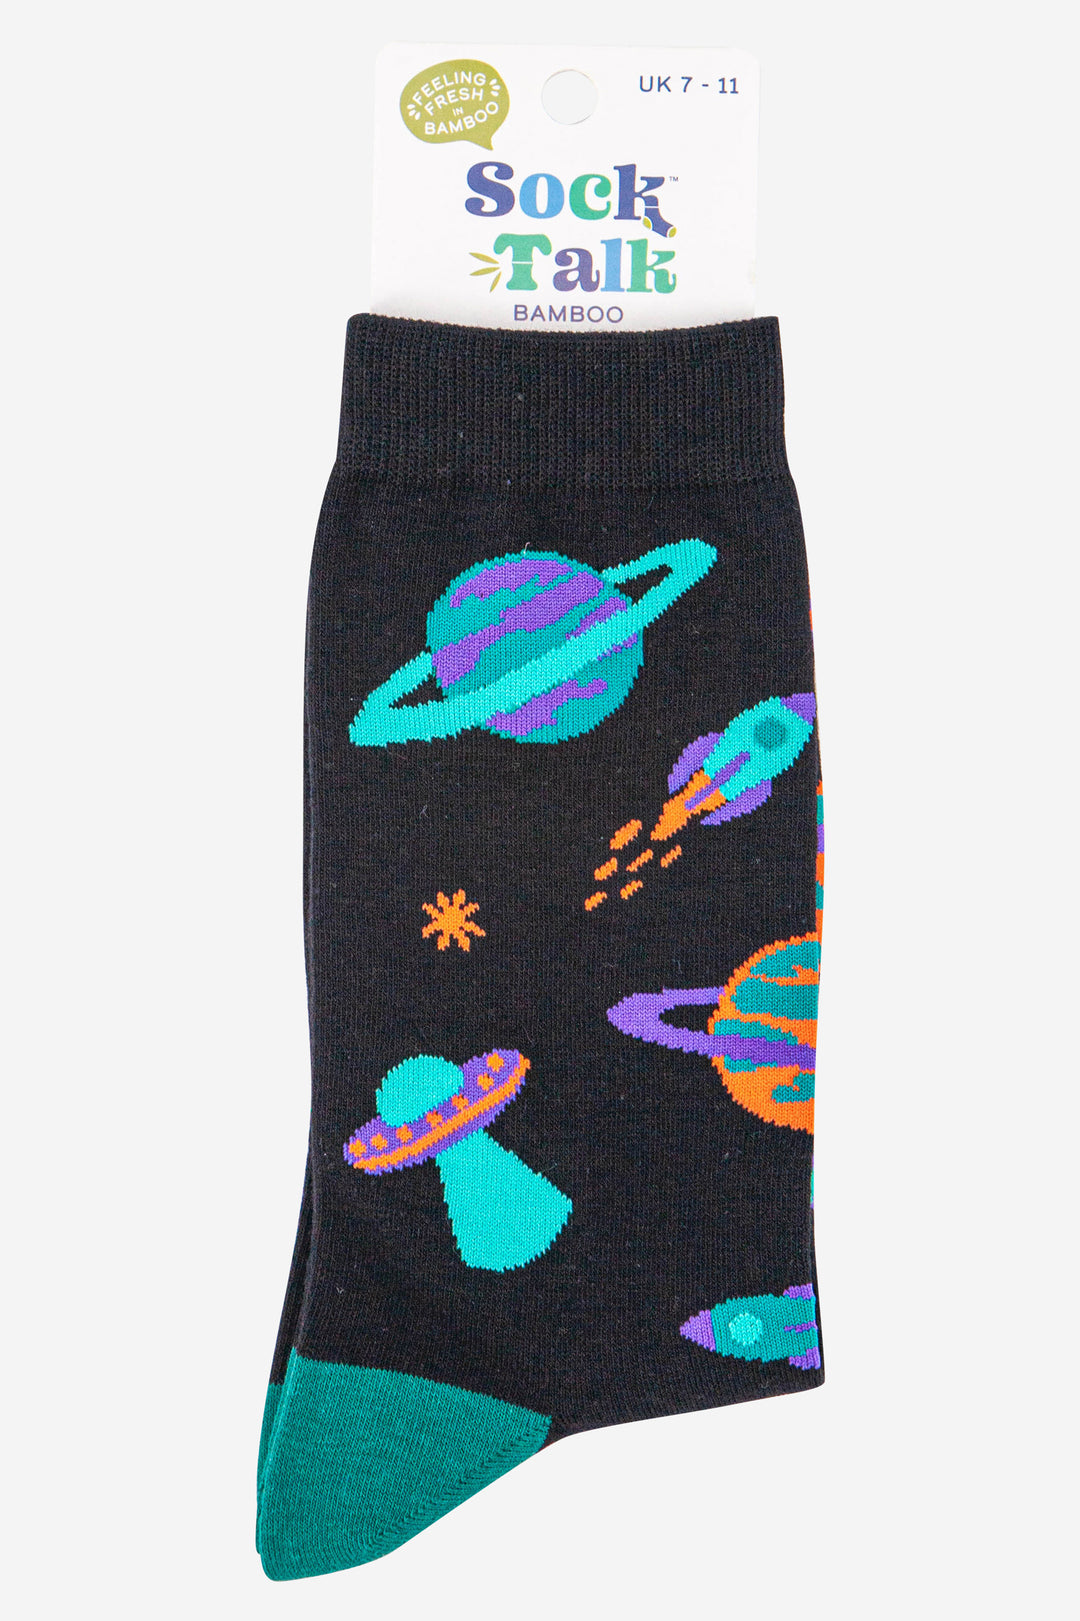 mens socks uk size 7-11 with a pattern of planets, rockets and ufos